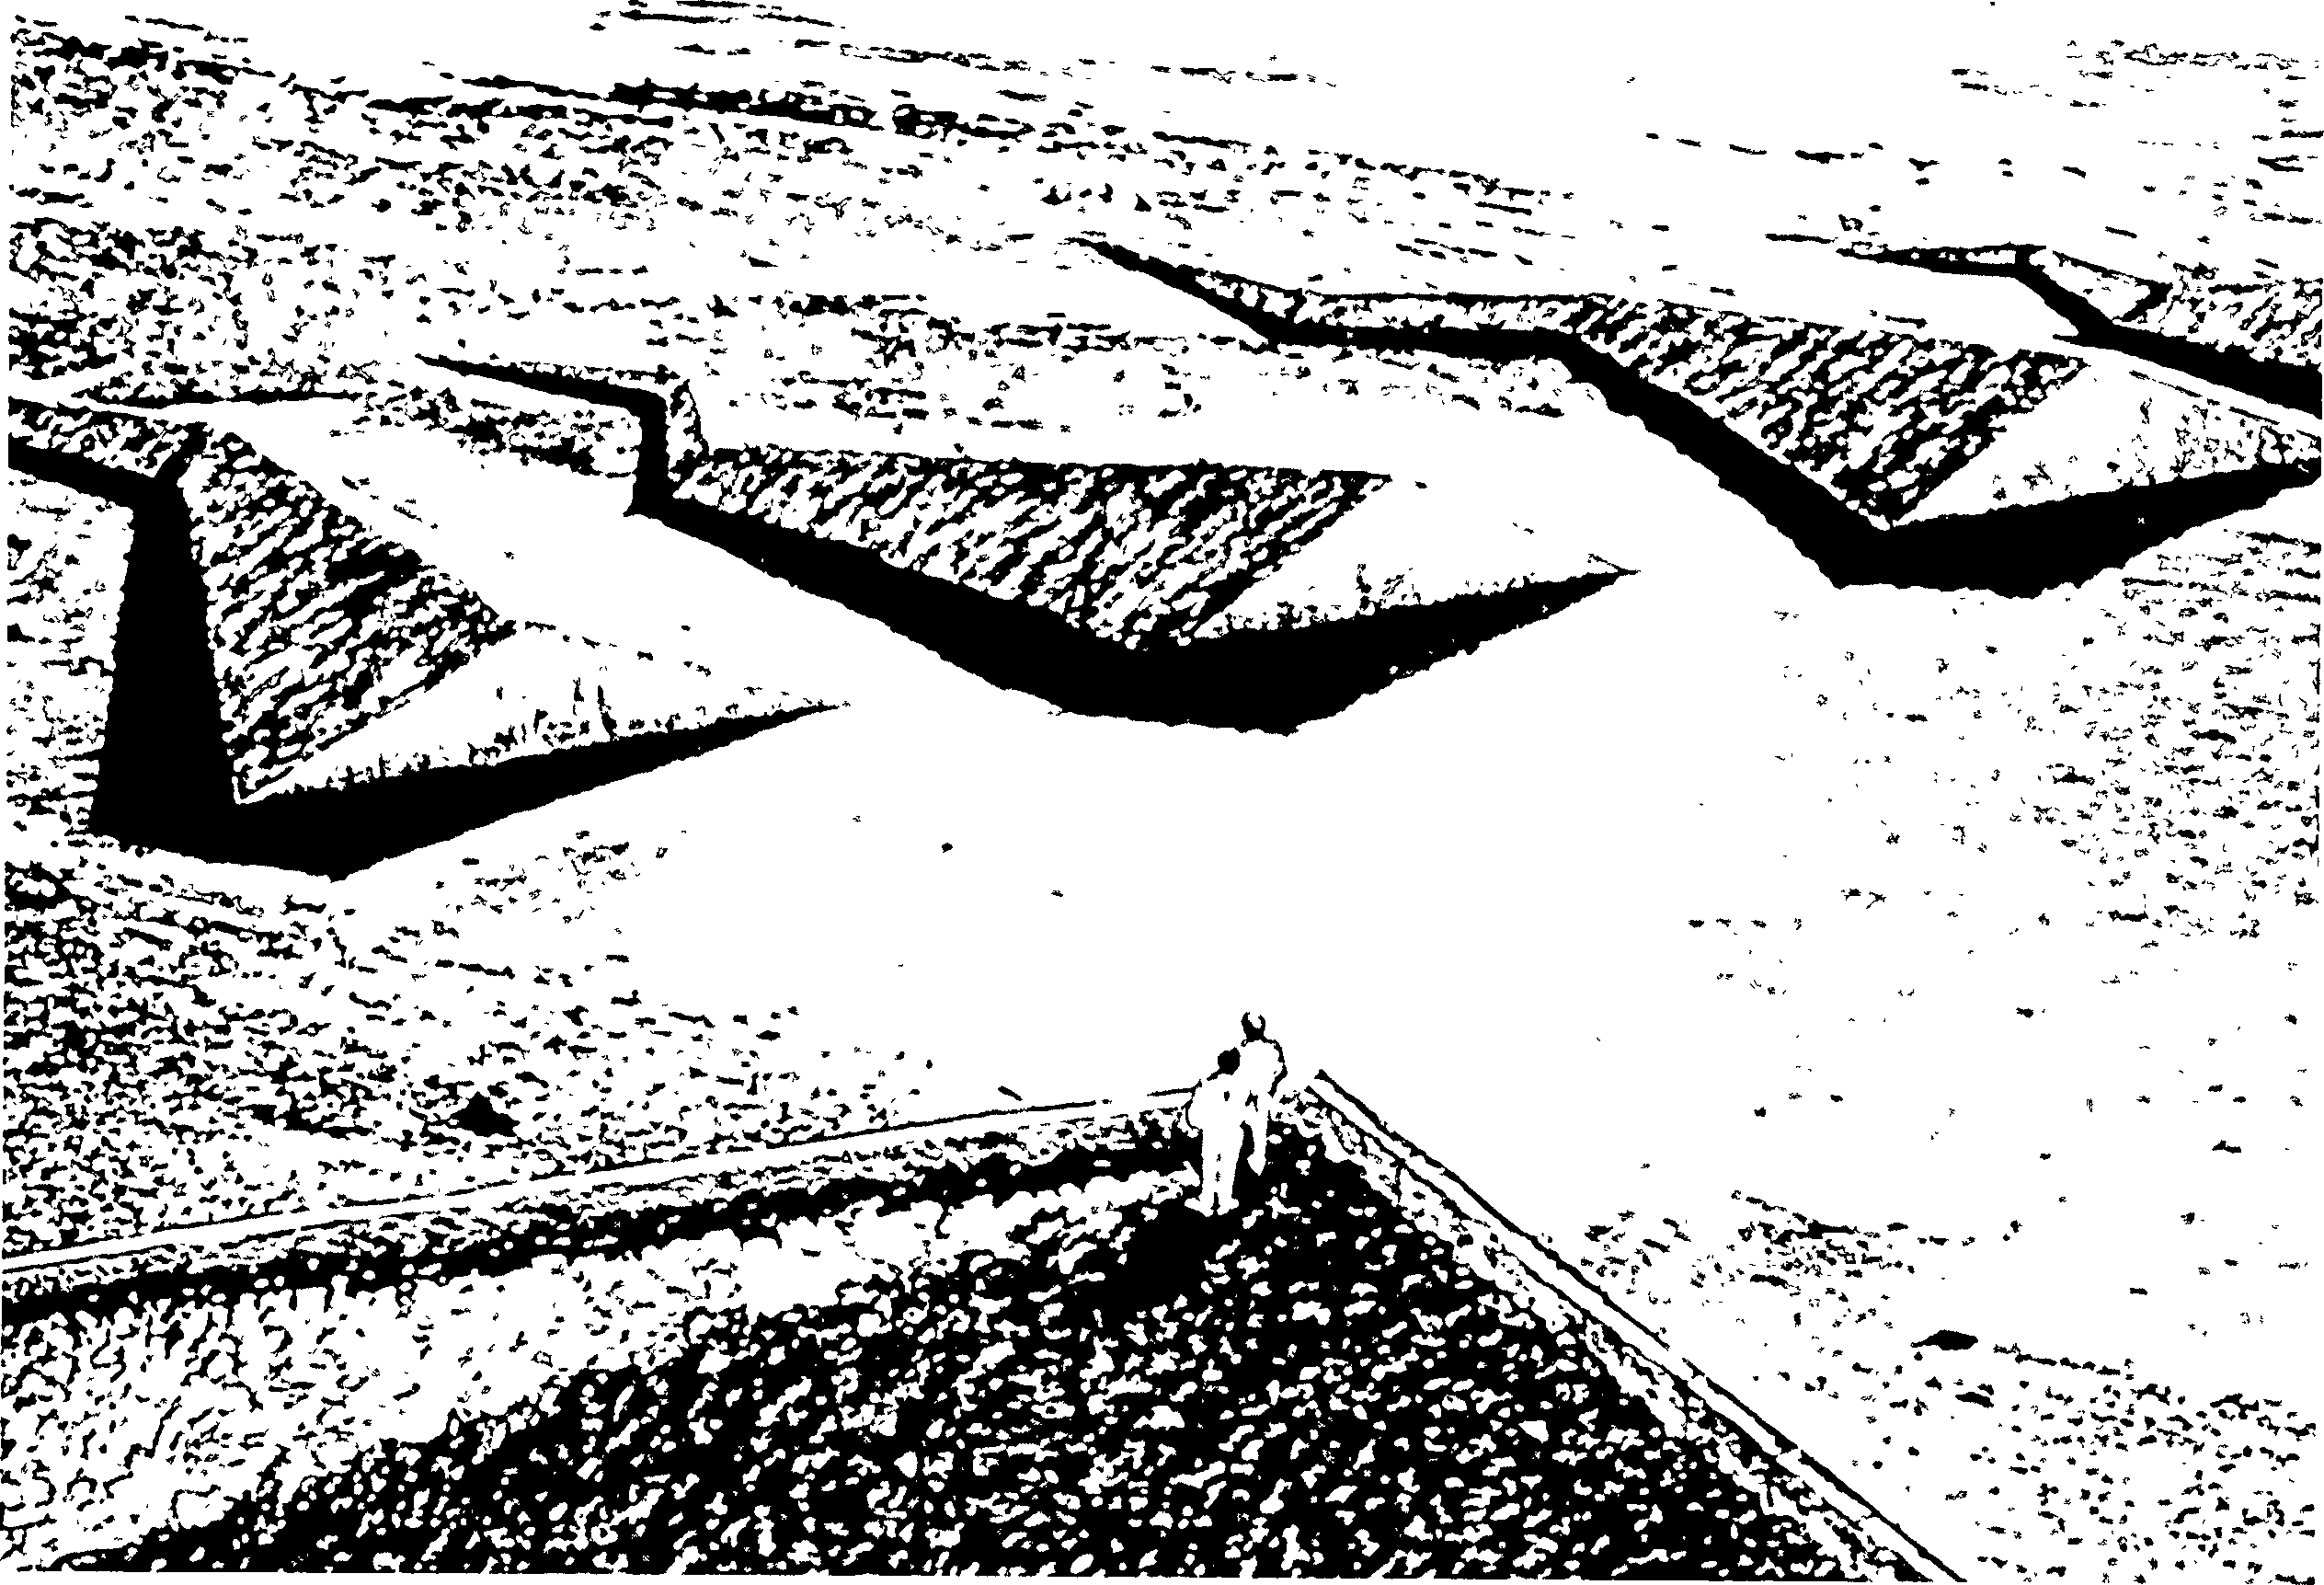 Drawing of two people standing within a boundary of zig-zag emanating rays. Each ray is sloped down each side, and narrows to a point at the outer edge.